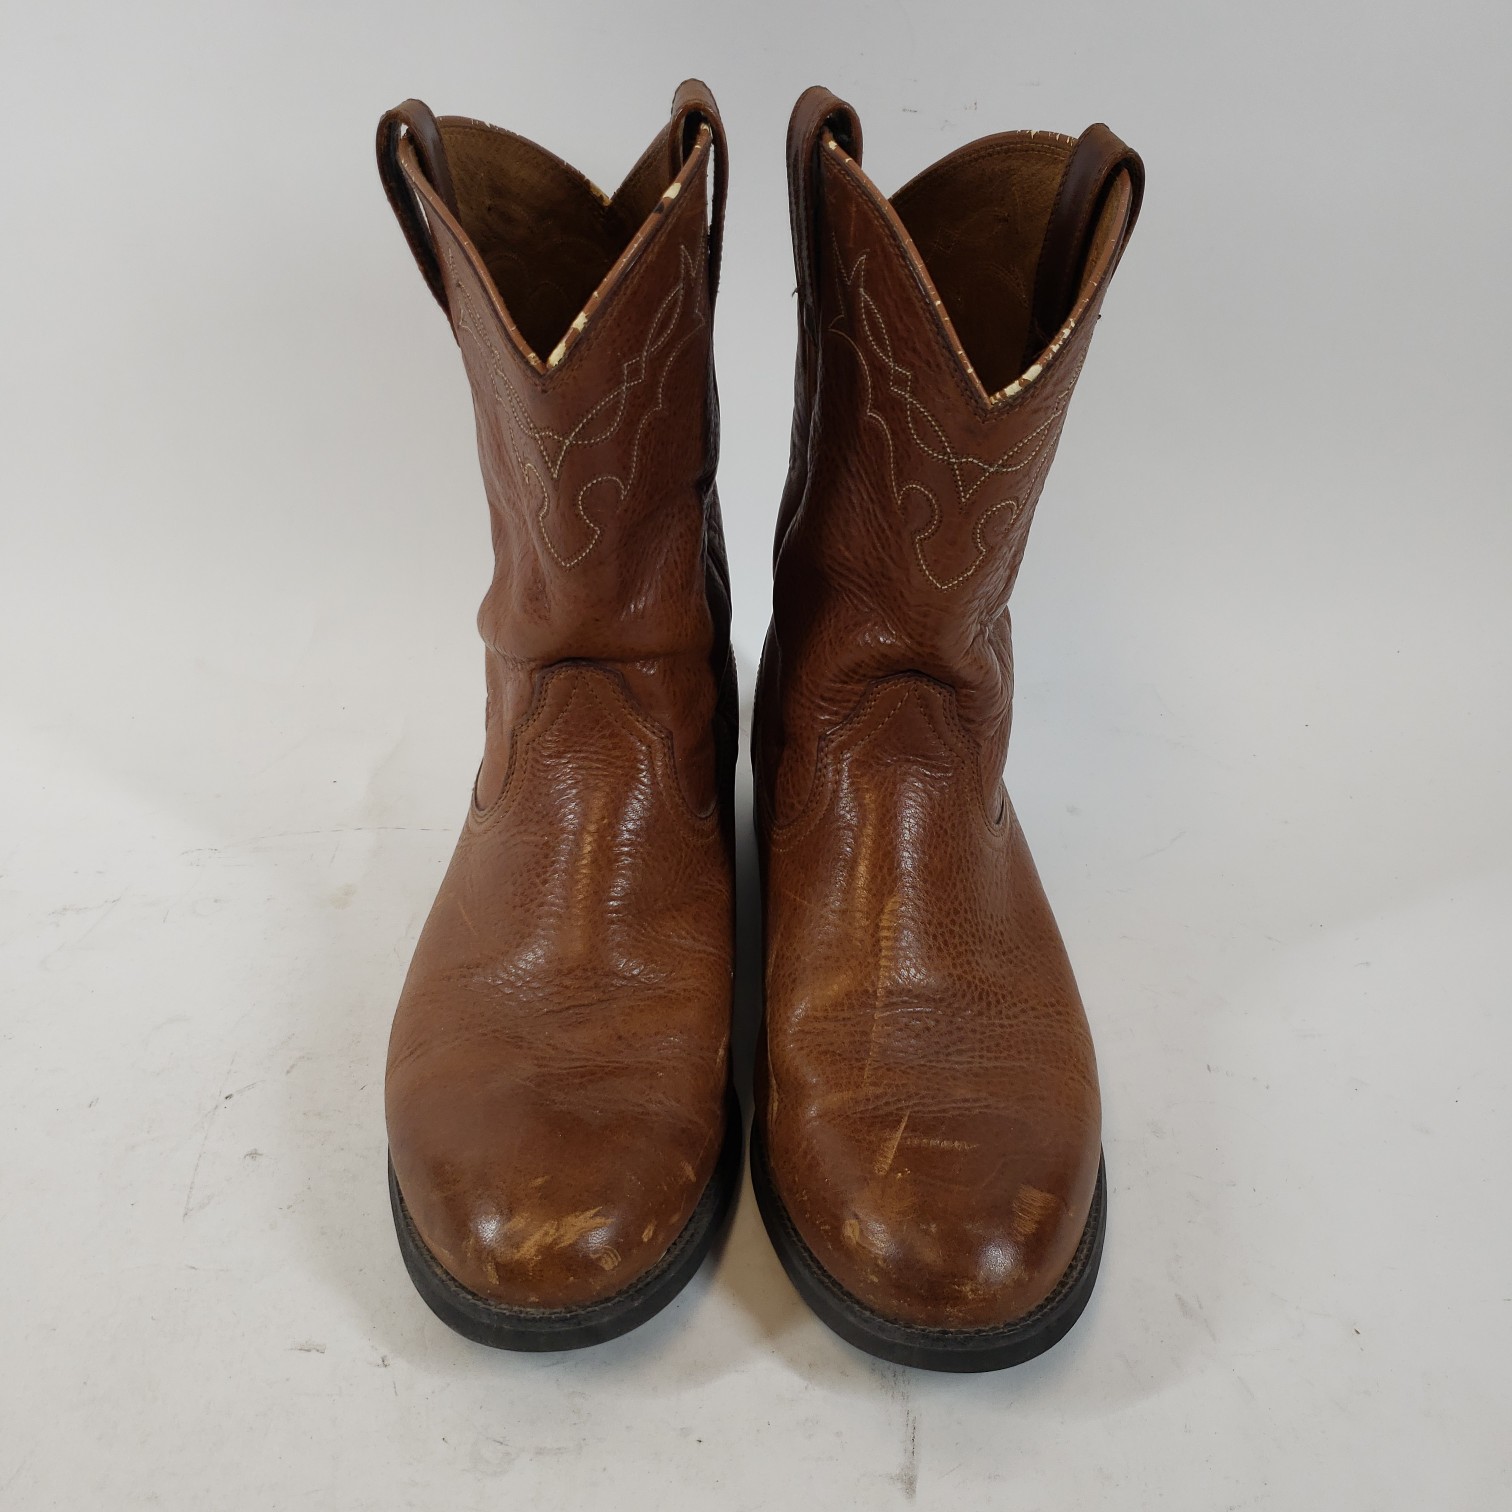 Buy the Mens Leather Pull On Classic Western Boots Size 11EE ...